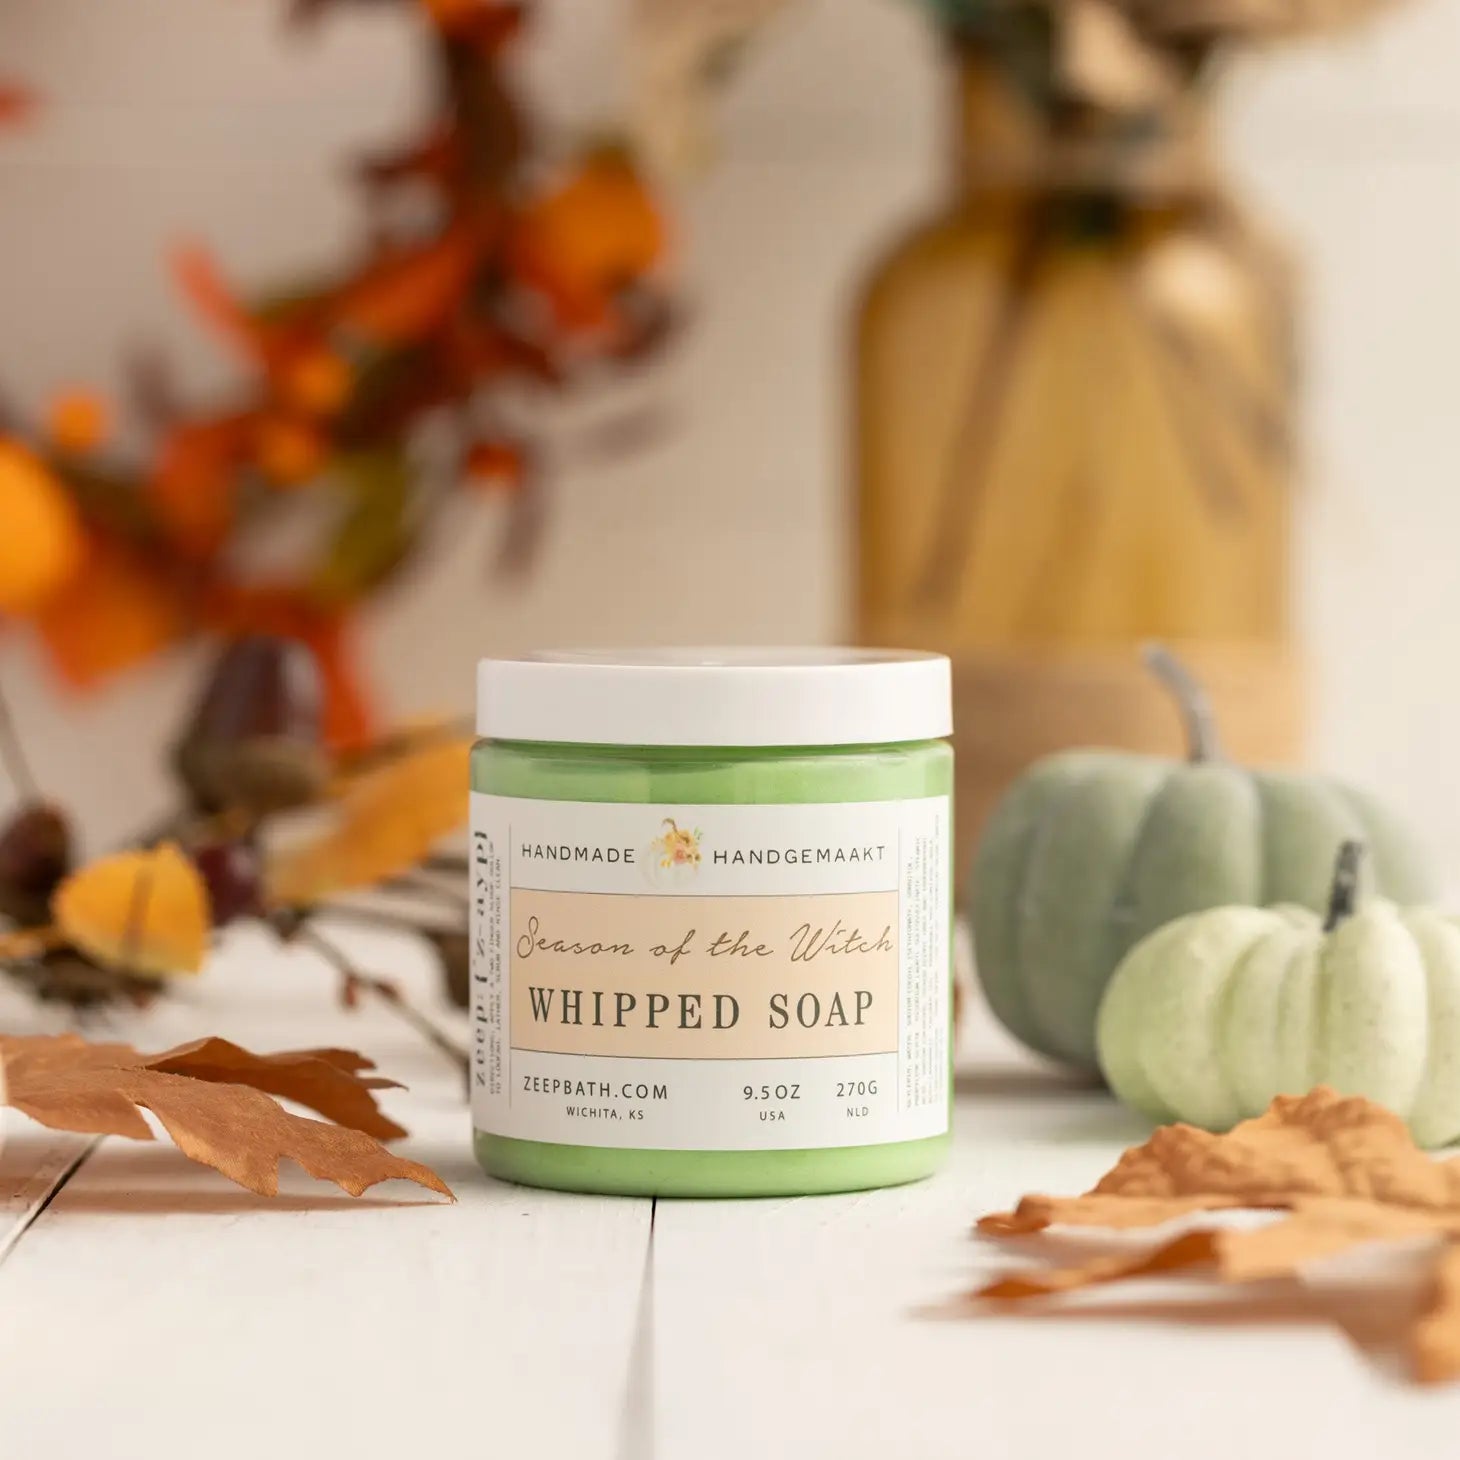 Season of the Witch Whipped Soap